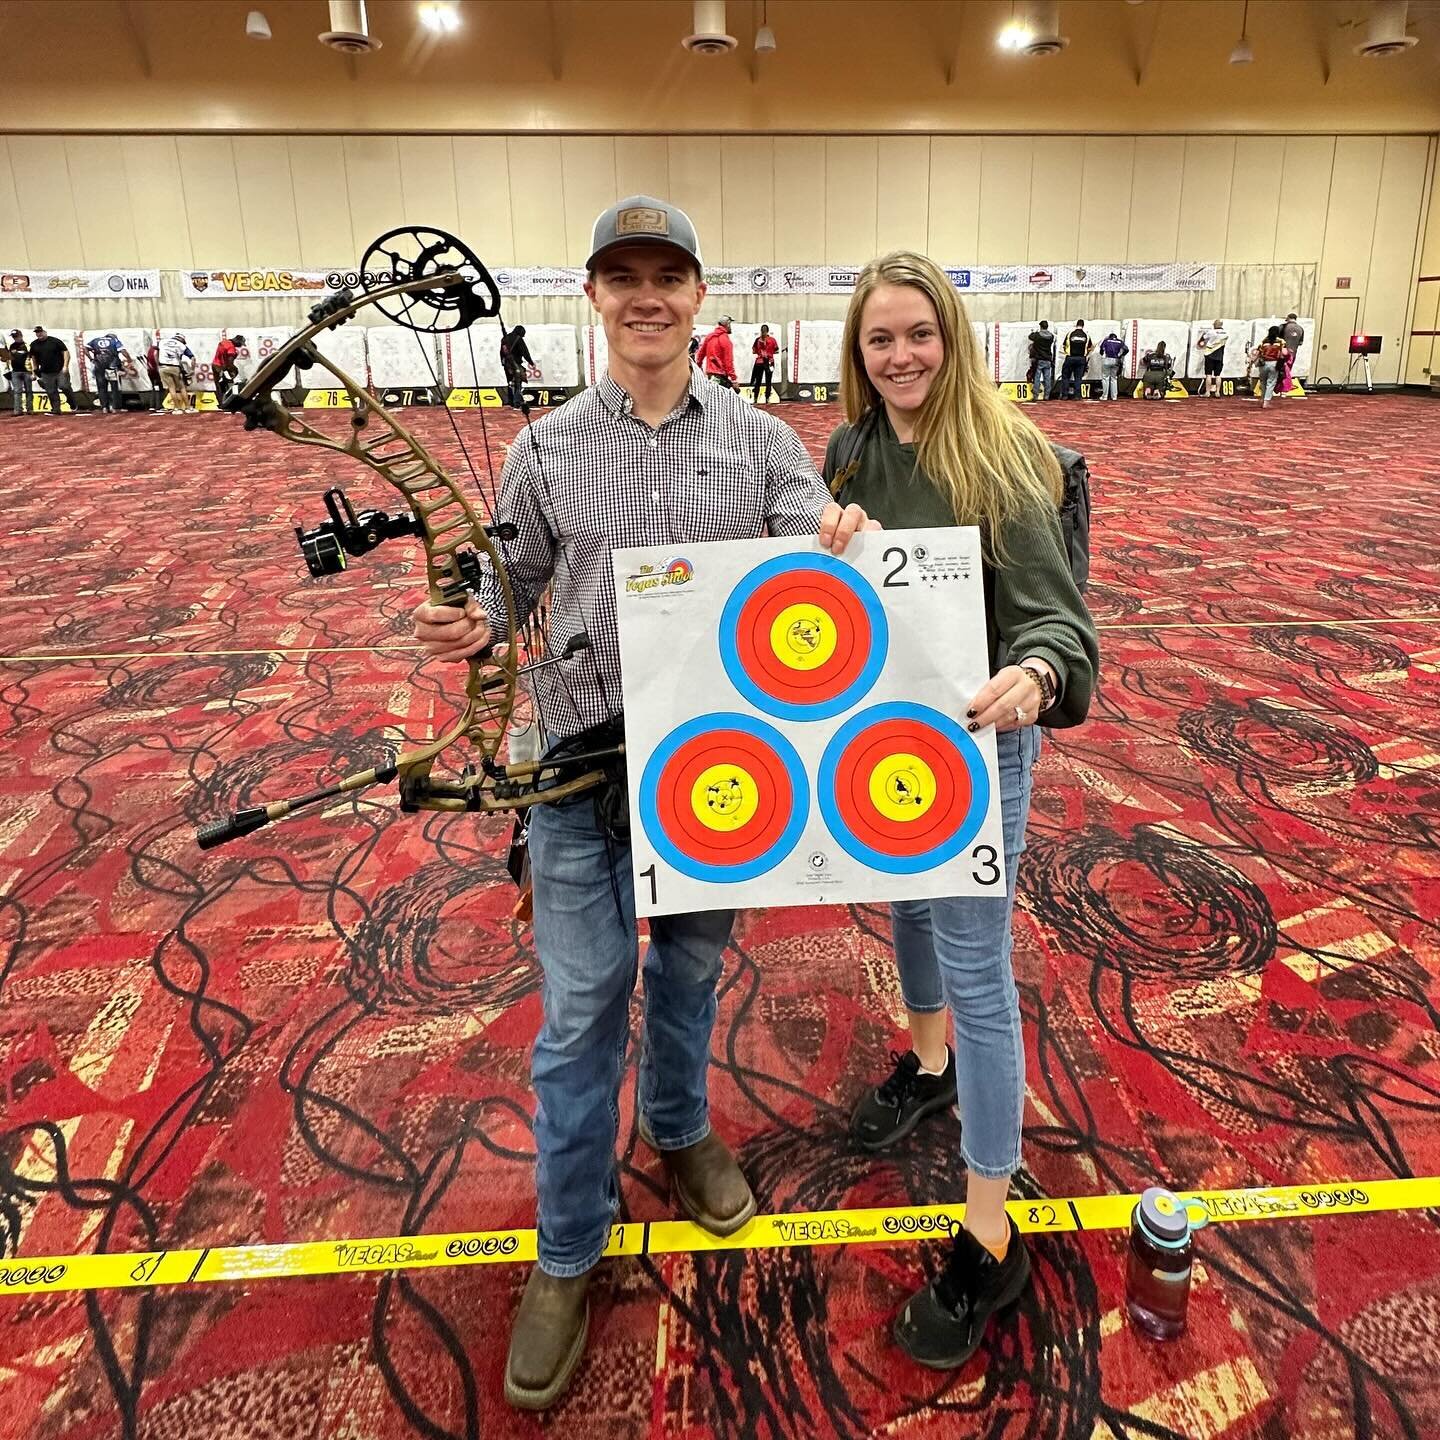 Caught all but one today here at @thevegasshoot Put the focus on perfect execution under pressure and the arrows landed well. I&rsquo;m far from where I want to be, but always working to be better. This is a mind game like no other and I can&rsquo;t 